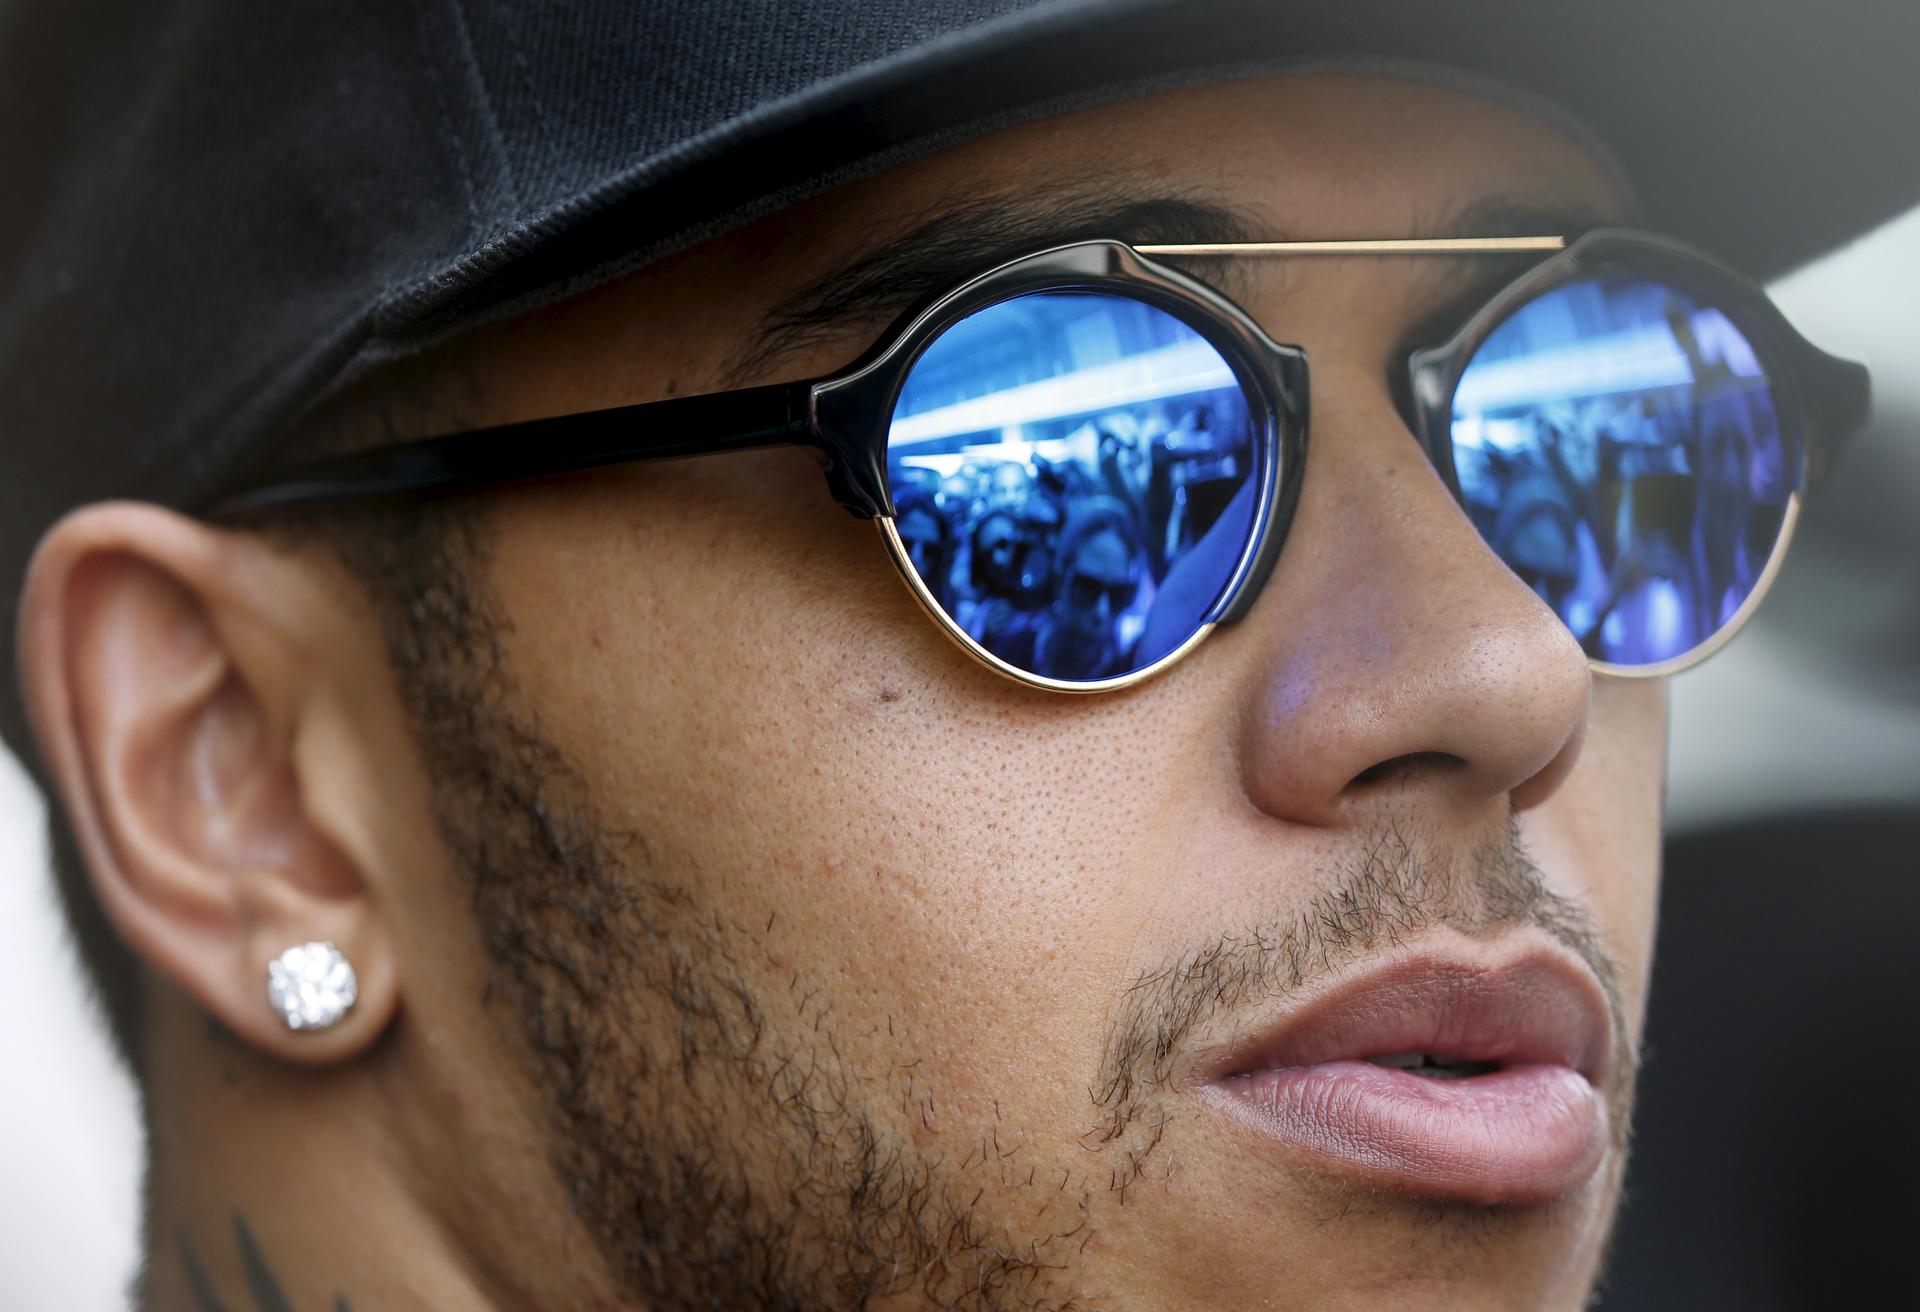 Mercedes Formula One driver Lewis Hamilton of Britain listens to a journalist's question as he attends a media conference ahead of the Brazilian F1 Grand Prix in Sao Paulo, Brazil, November 12, 2015.